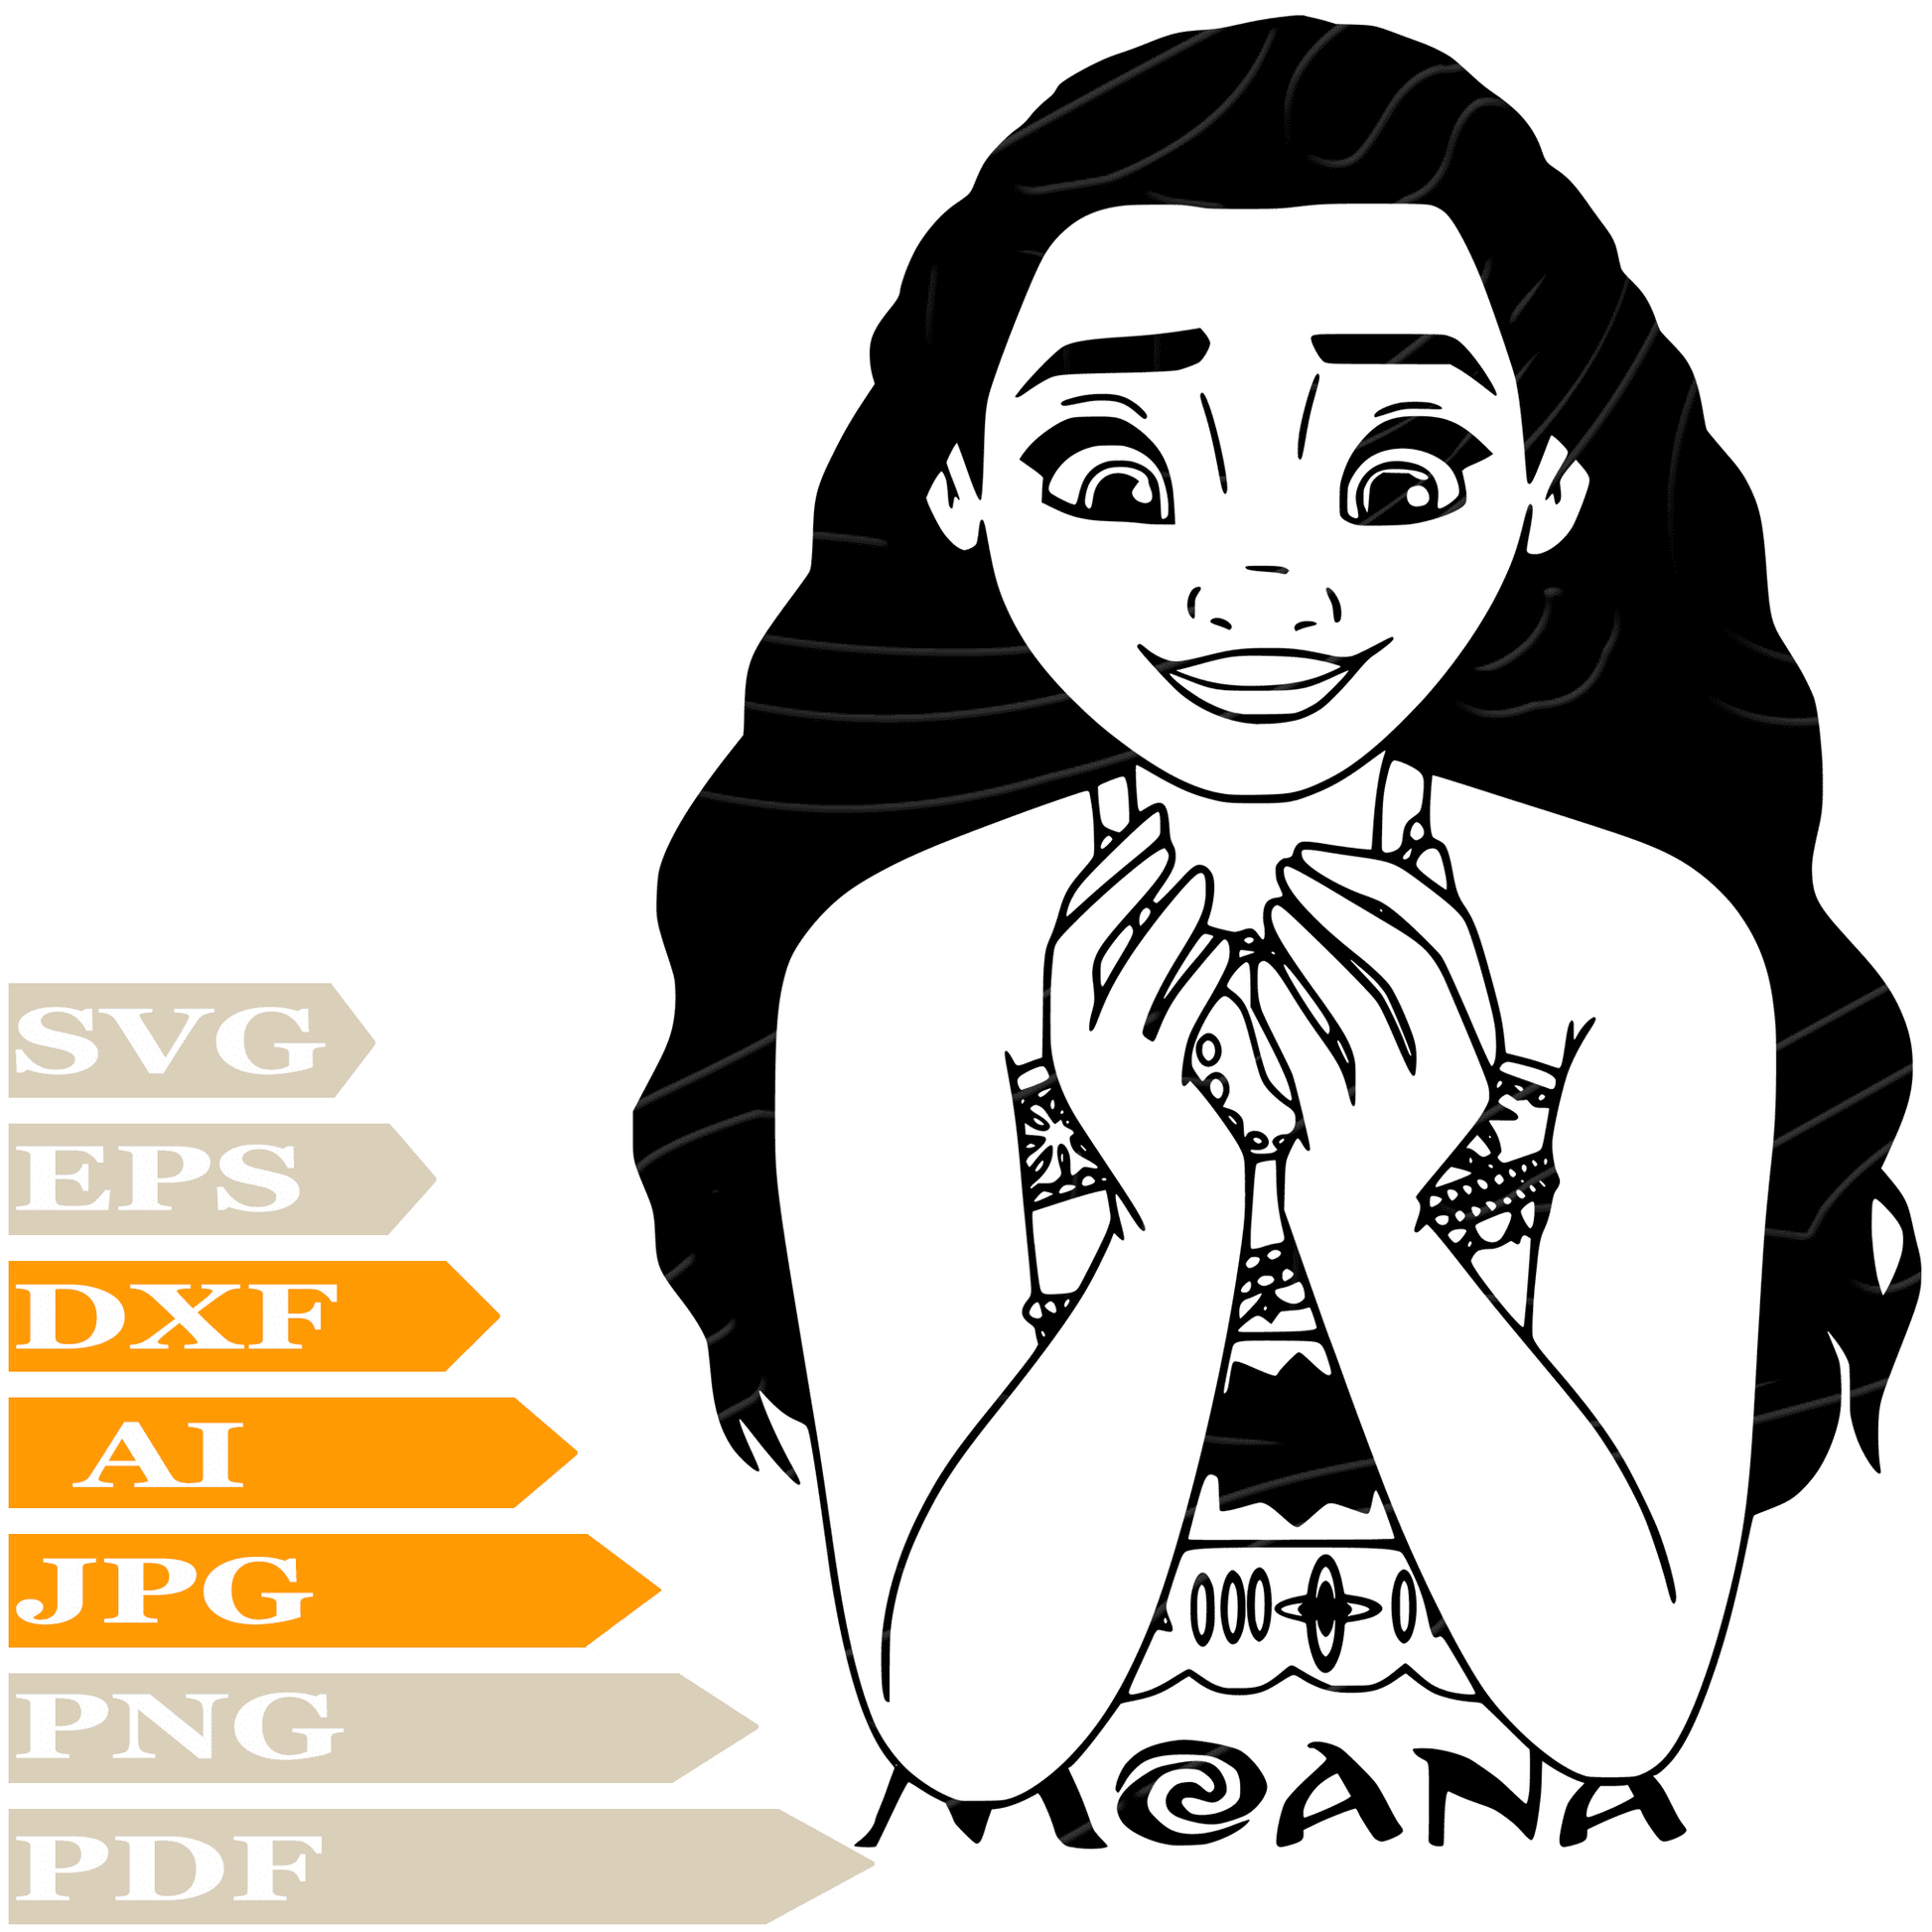 ﻿Moana SVG-Moana Face Personalized SVG-Moana Drawing SVG-Moana Vector Graphics-PNG-Decal-Cricut-Digital Files-Clip Art-Cut File-For Shirts-Silhouette